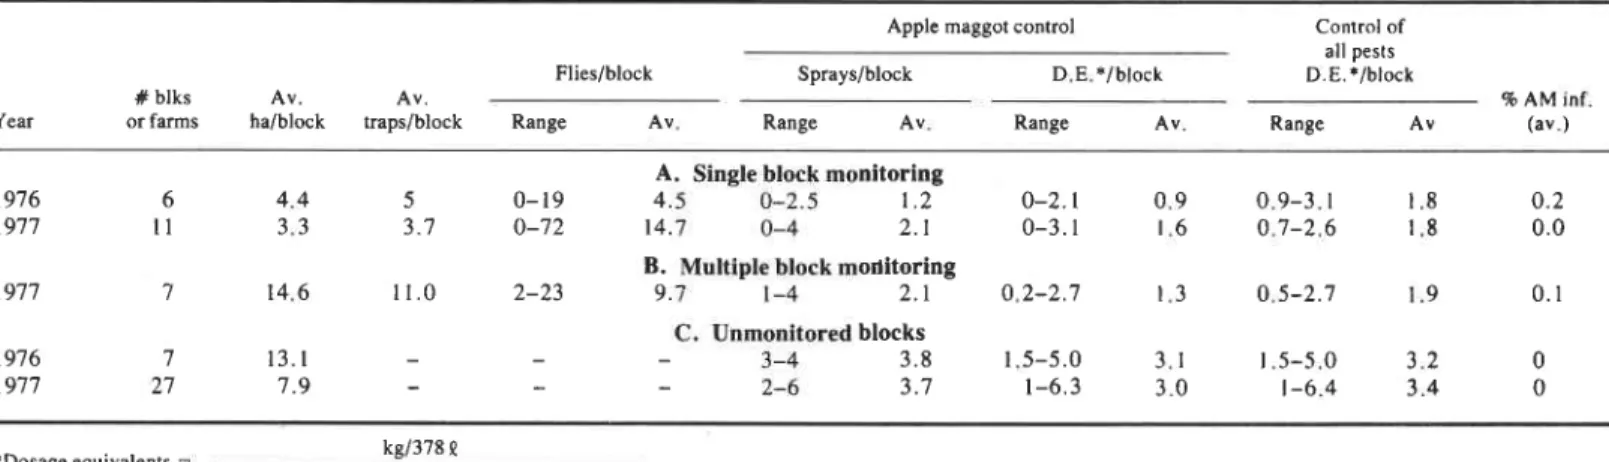 Table  111.  Use of apple maggot traps to determine the need and timing of apple maggot control sprays  i n   New York orchards 